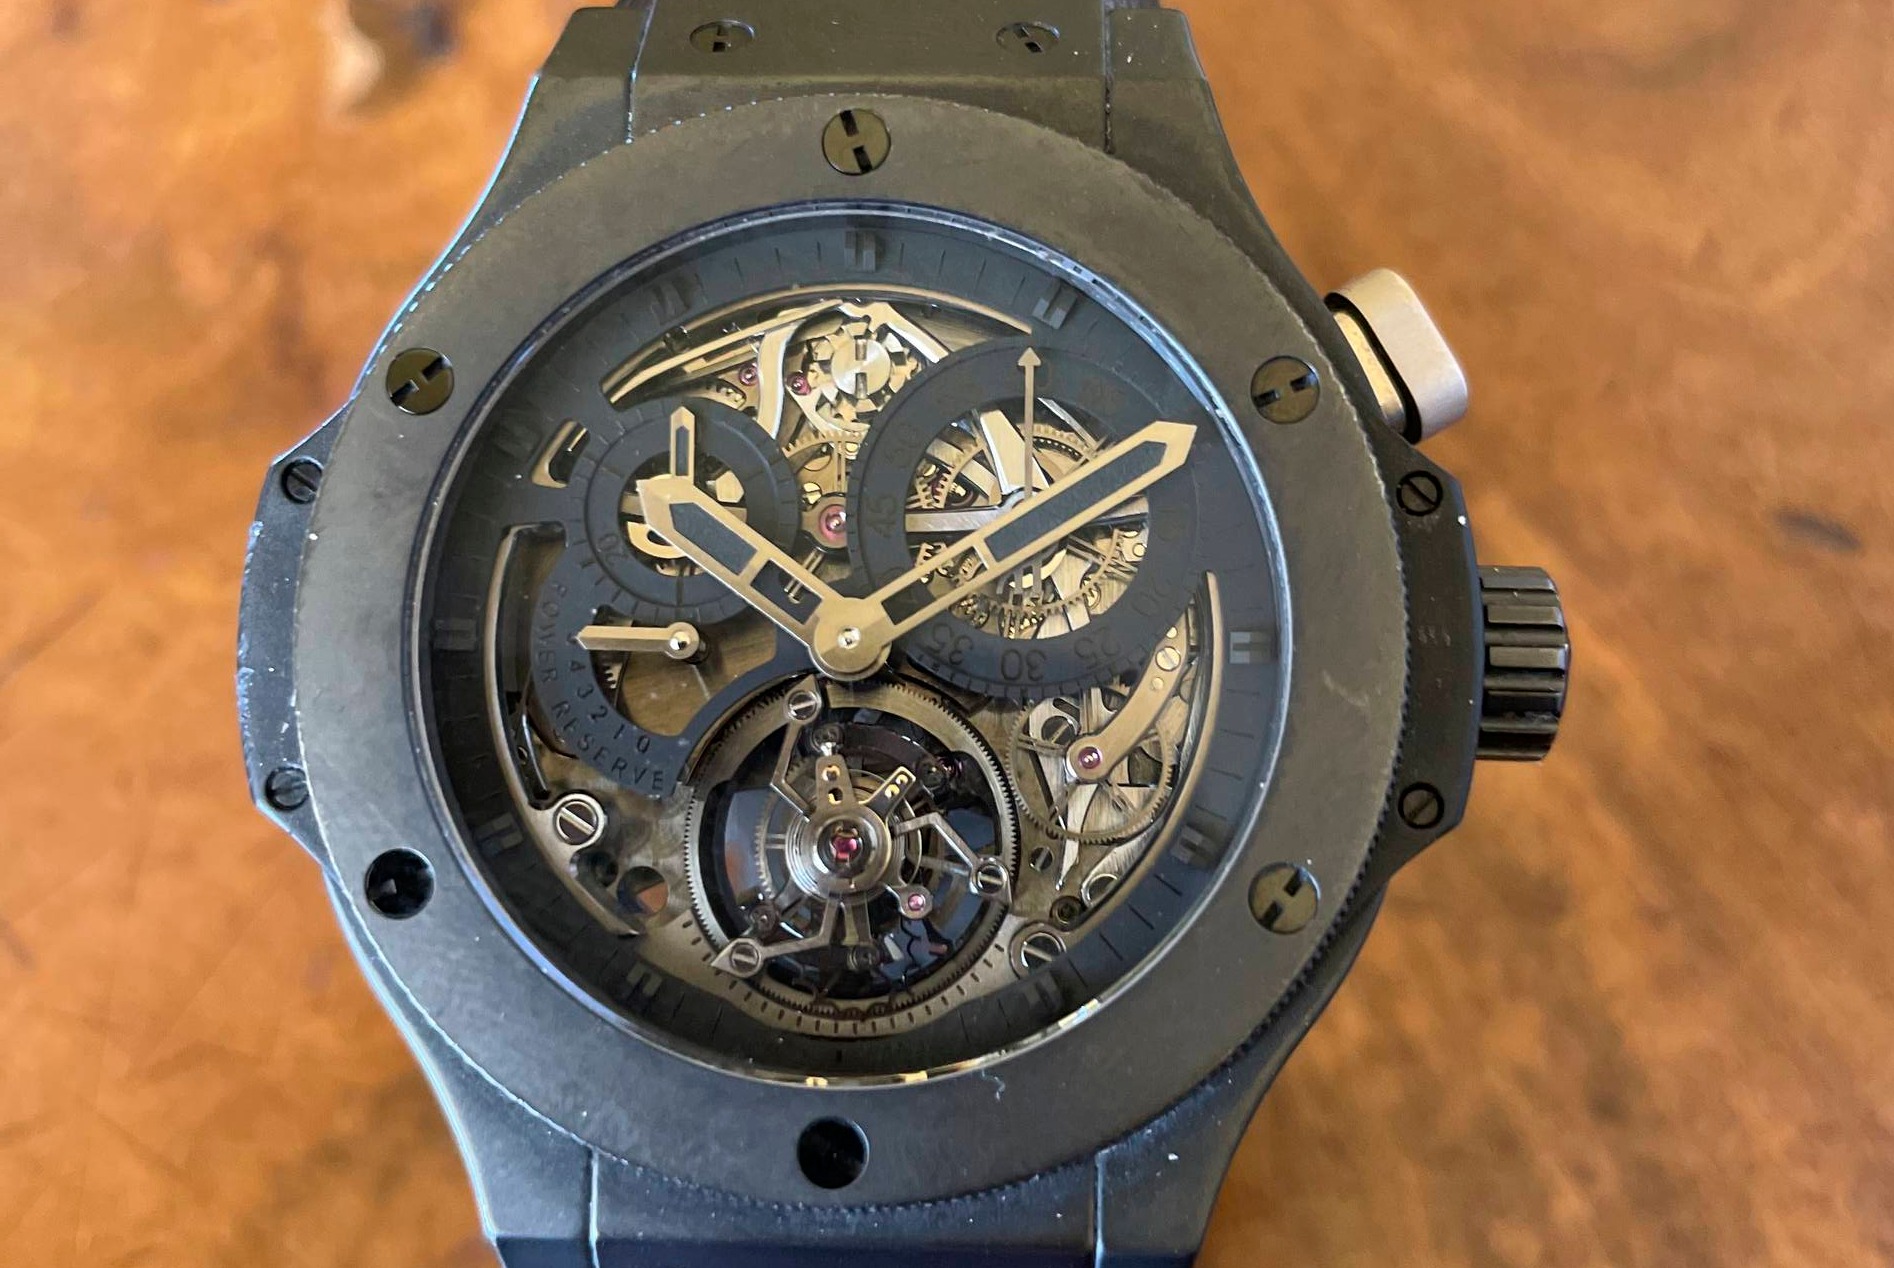 Watches Enter NFT Space with Digital Edition of Famed Hublot